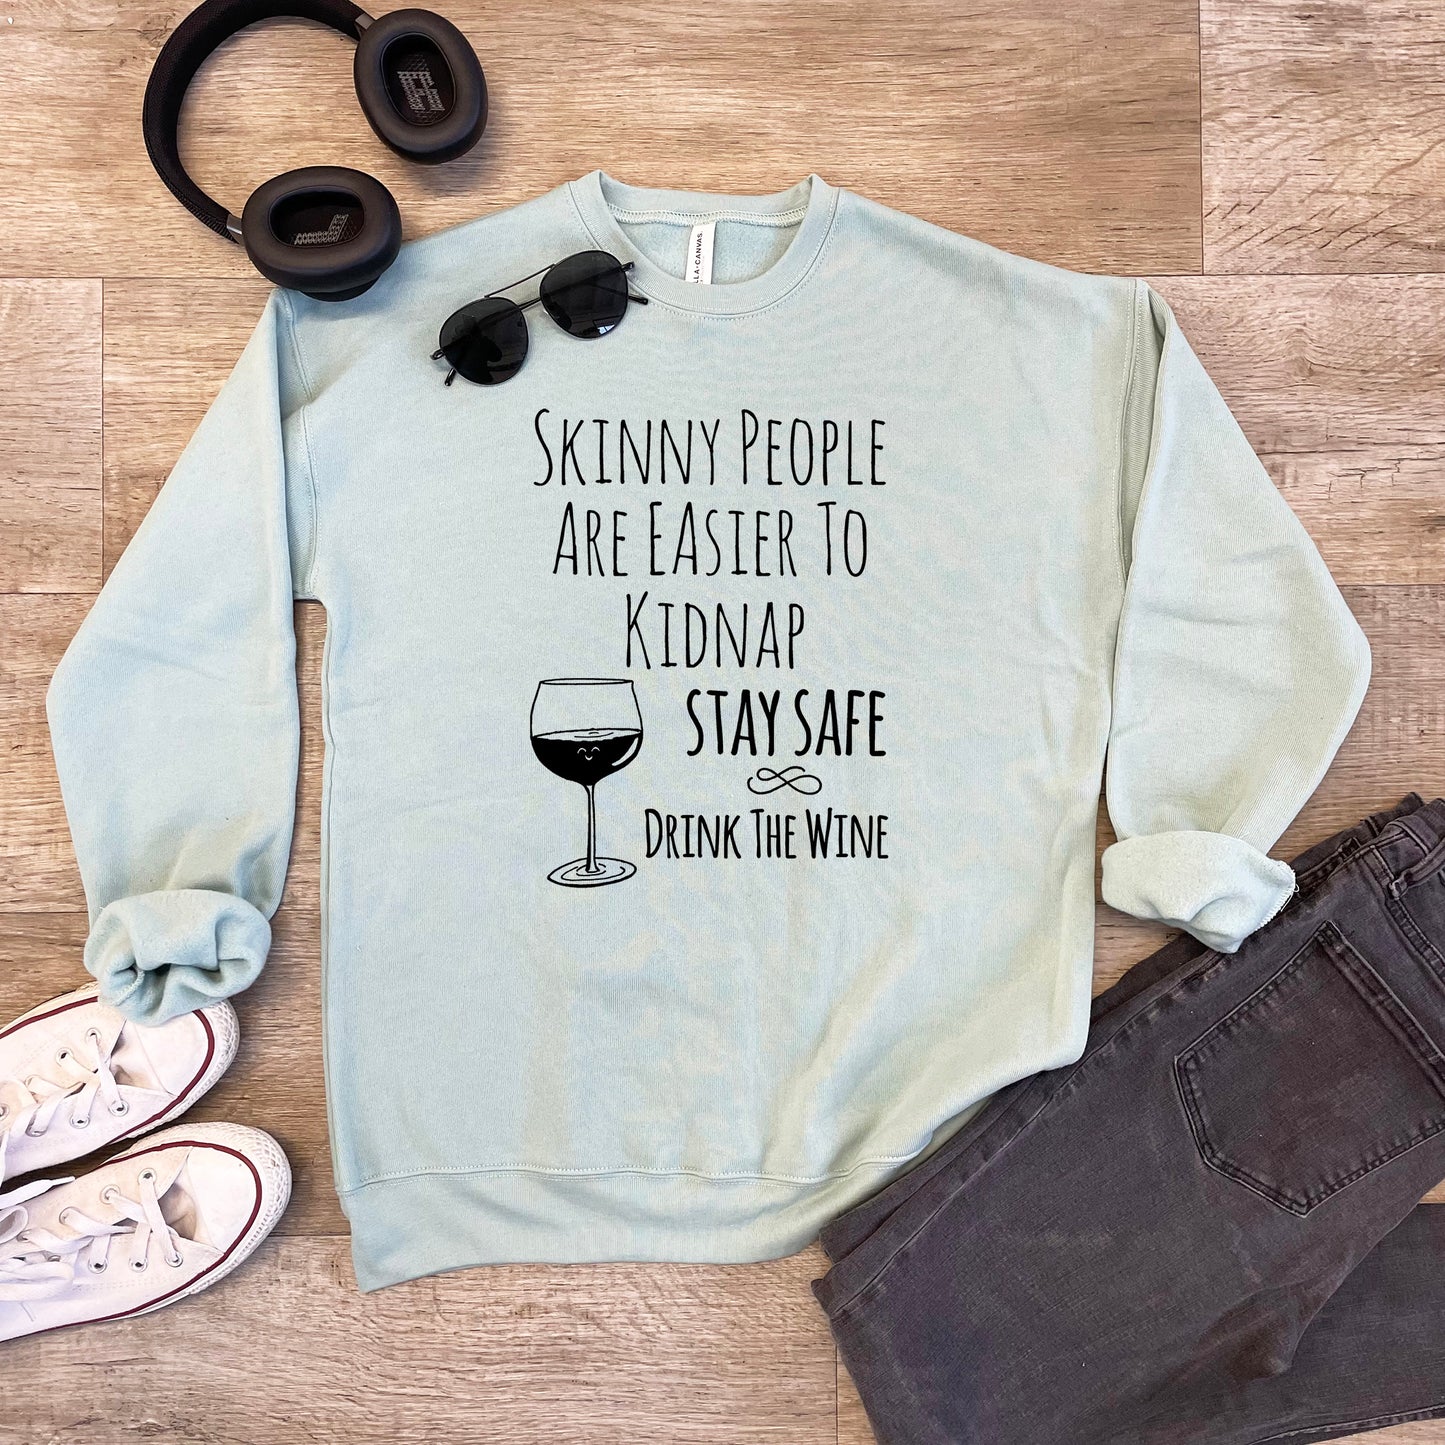 Skinny People Are Easier To Kidnap. Stay Safe. Drink The Wine - Unisex Sweatshirt - Heather Gray or Dusty Blue